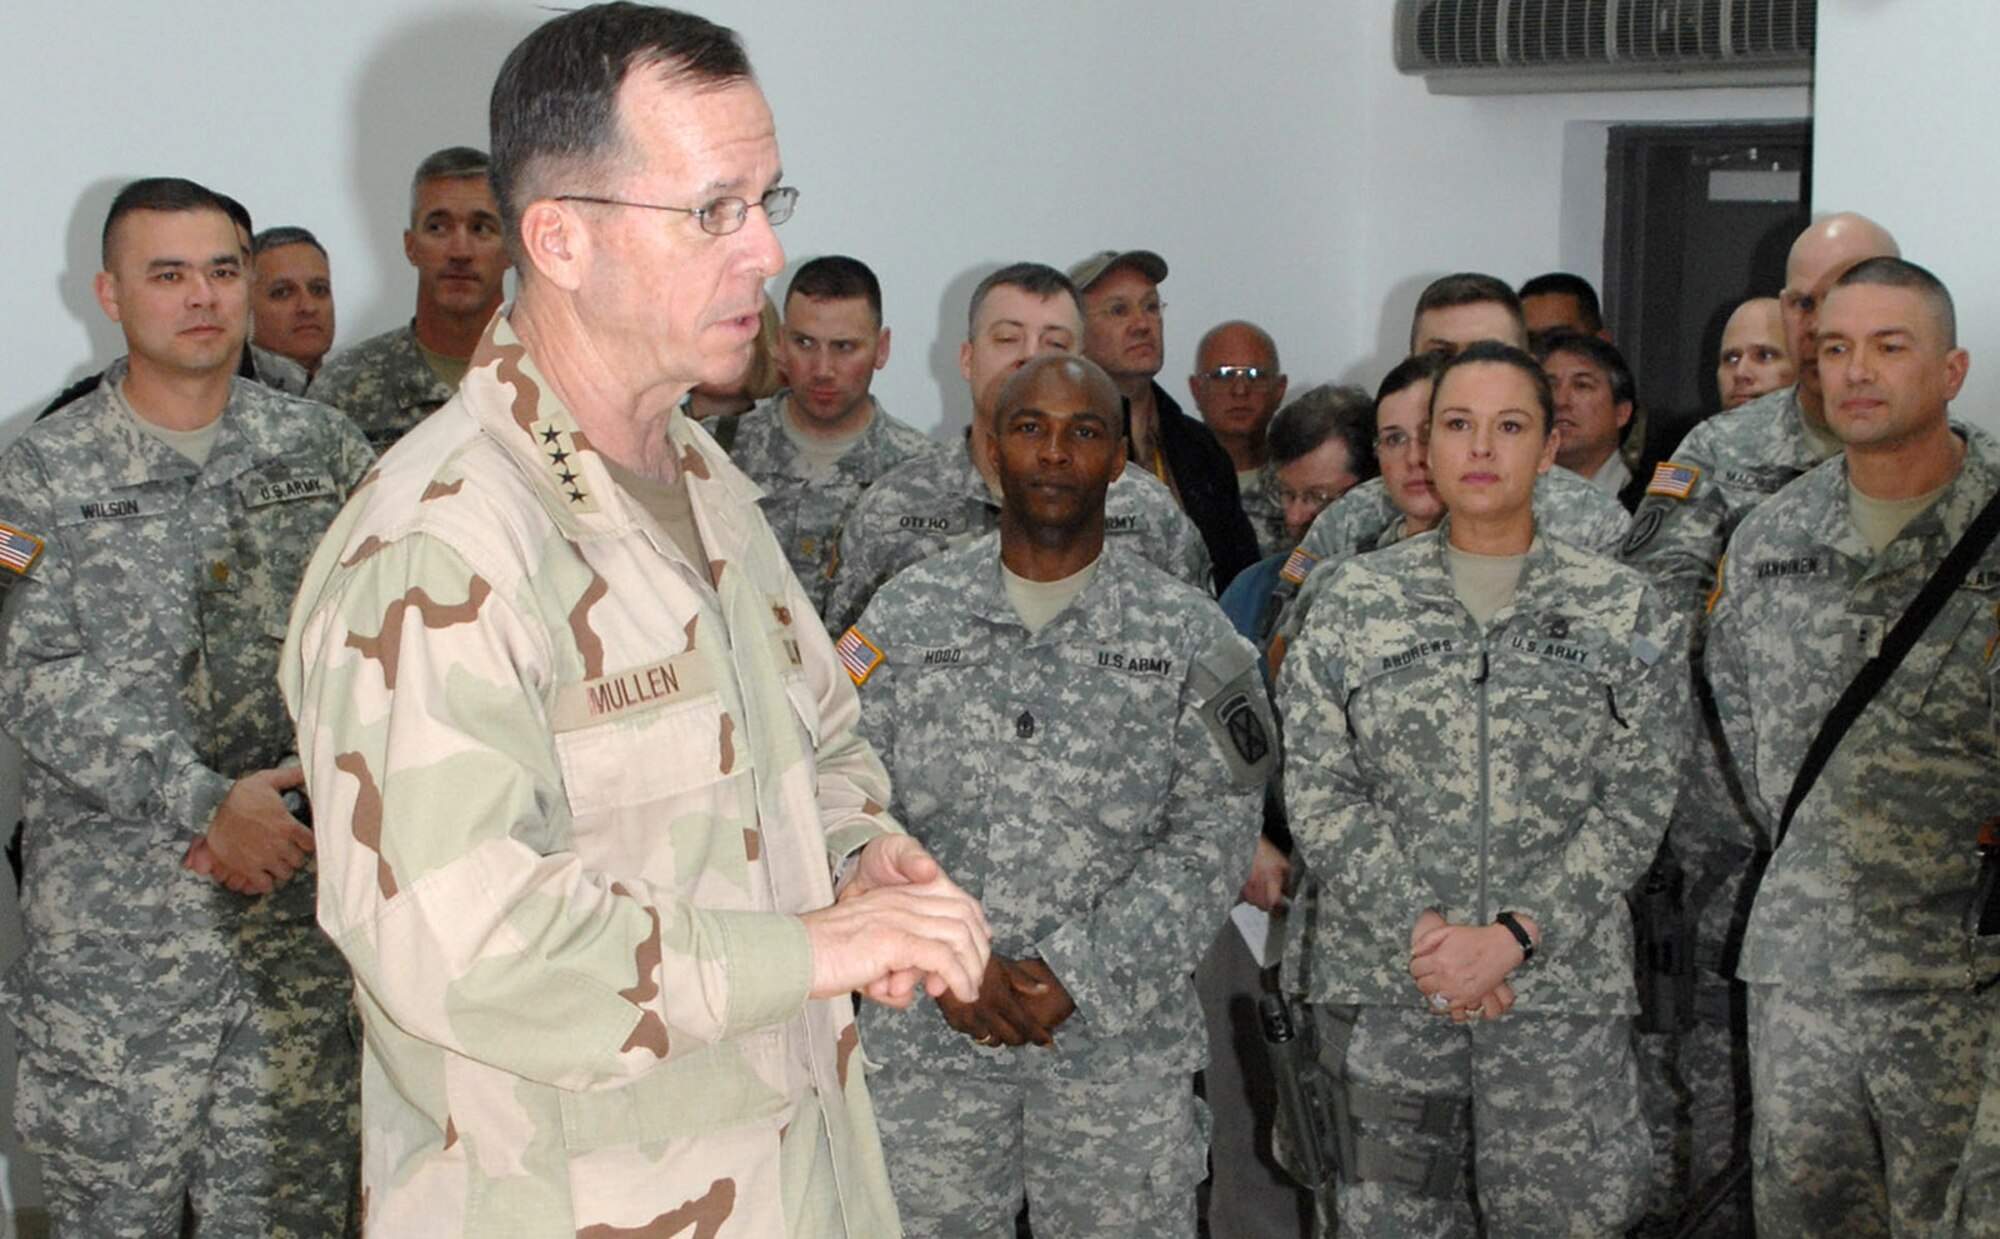 Chairman of the Joint Chiefs of Staff Navy Adm. Mike Mullen address Soldiers and Airmen during his March 2 visit to Kirkuk Air Base, Iraq. The highest ranking military officer attended meetings with the State Department Provincial Reconstruction Team, presided over a short promotion ceremony for two Army officers and had dinner with several Airmen and Soldiers during his visit. (U.S. Air Force photo/Senior Master Sgt. Don Senger) 
